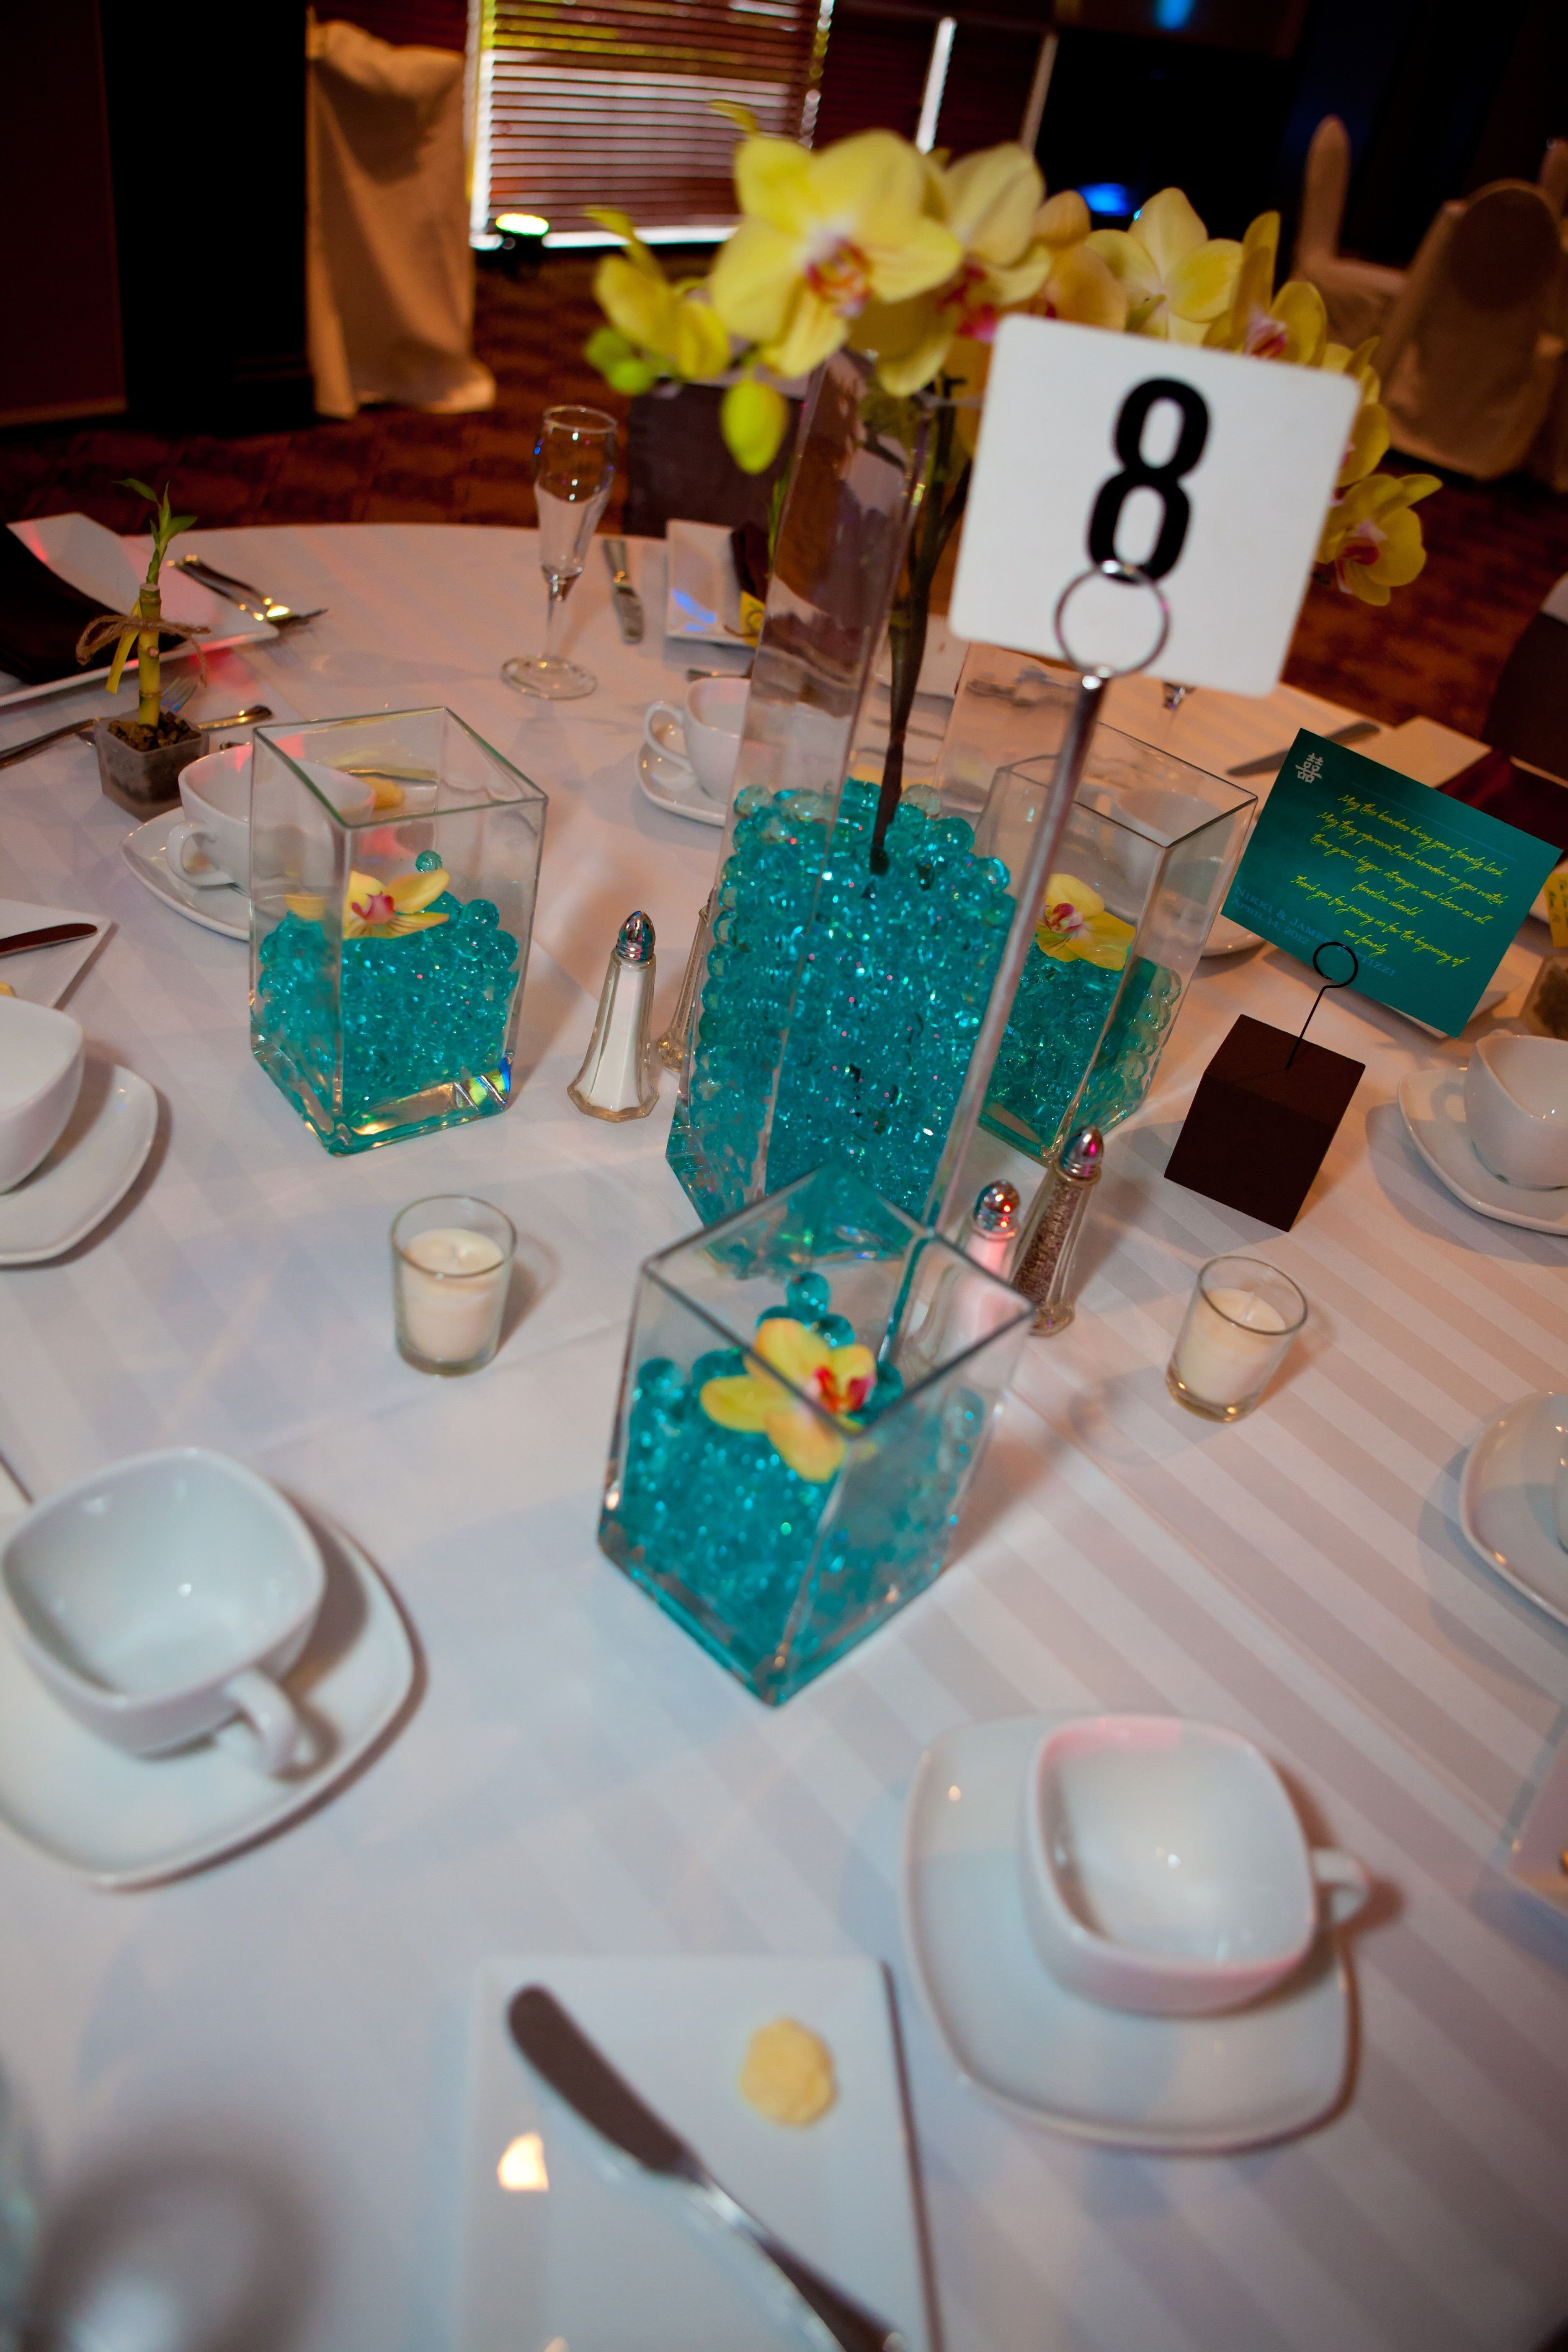 21 Stylish 20 Inch Vase Centerpiece 2024 free download 20 inch vase centerpiece of wedding centerpieces square vases teal water beads yellow regarding centerpieces square vases teal water beads yellow orchids candles